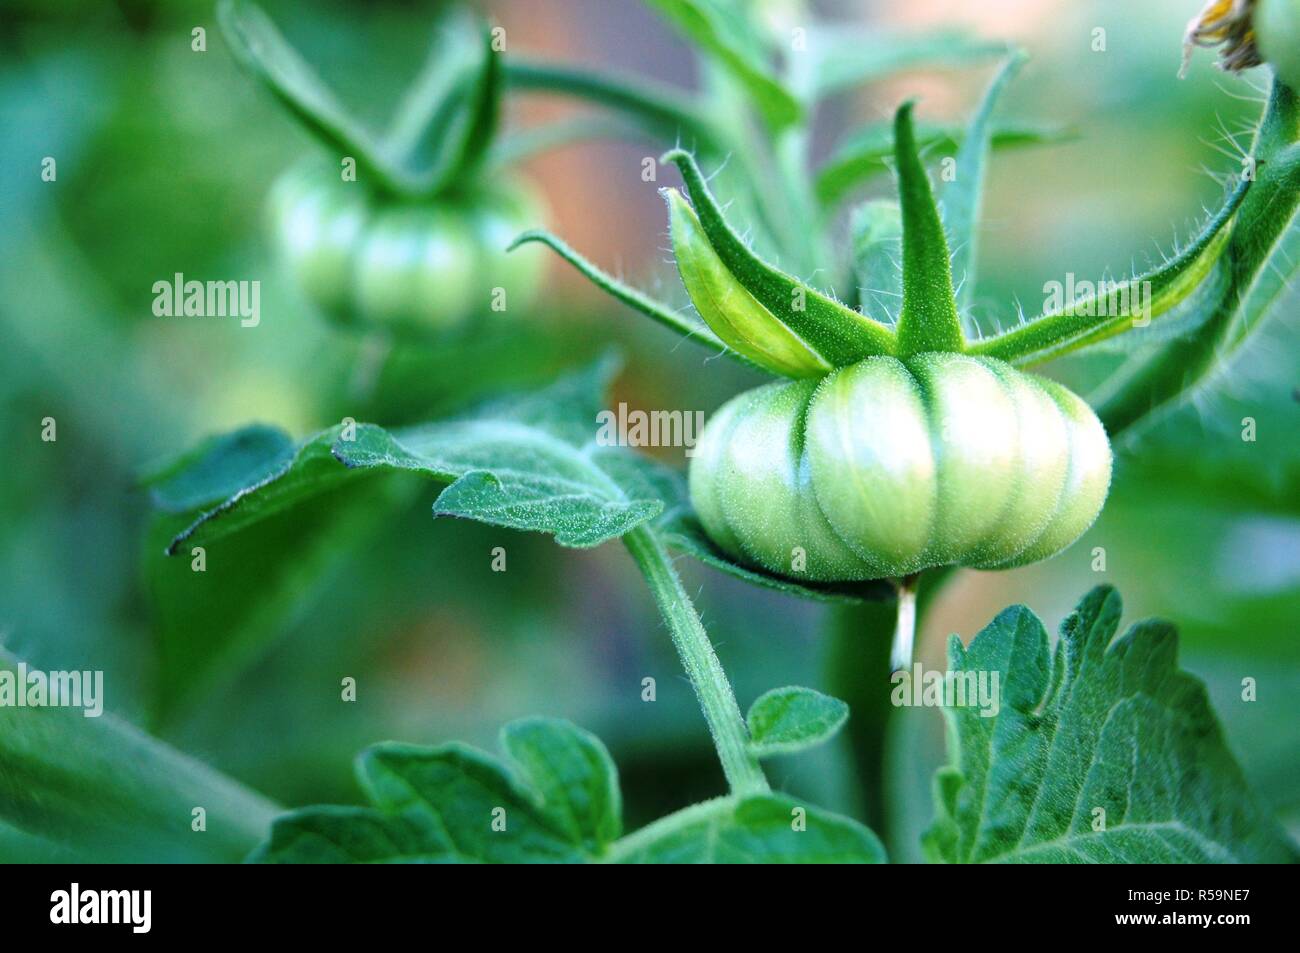 old tomatoes species in growth Stock Photo